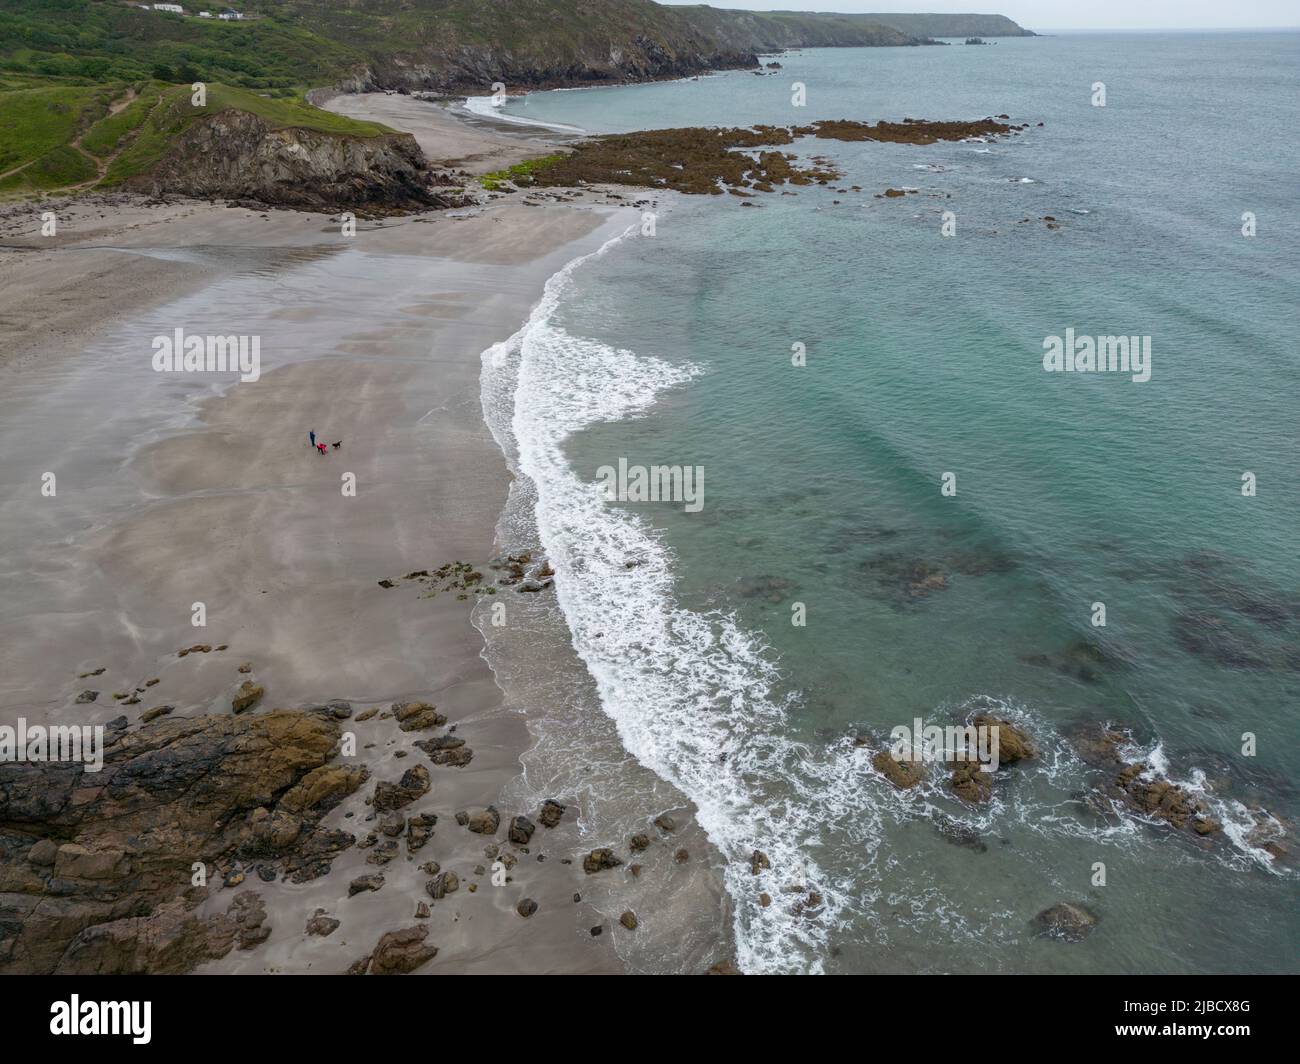 An aerial view of Kennack Sands on the south coast of Cornwall, England. Stock Photo